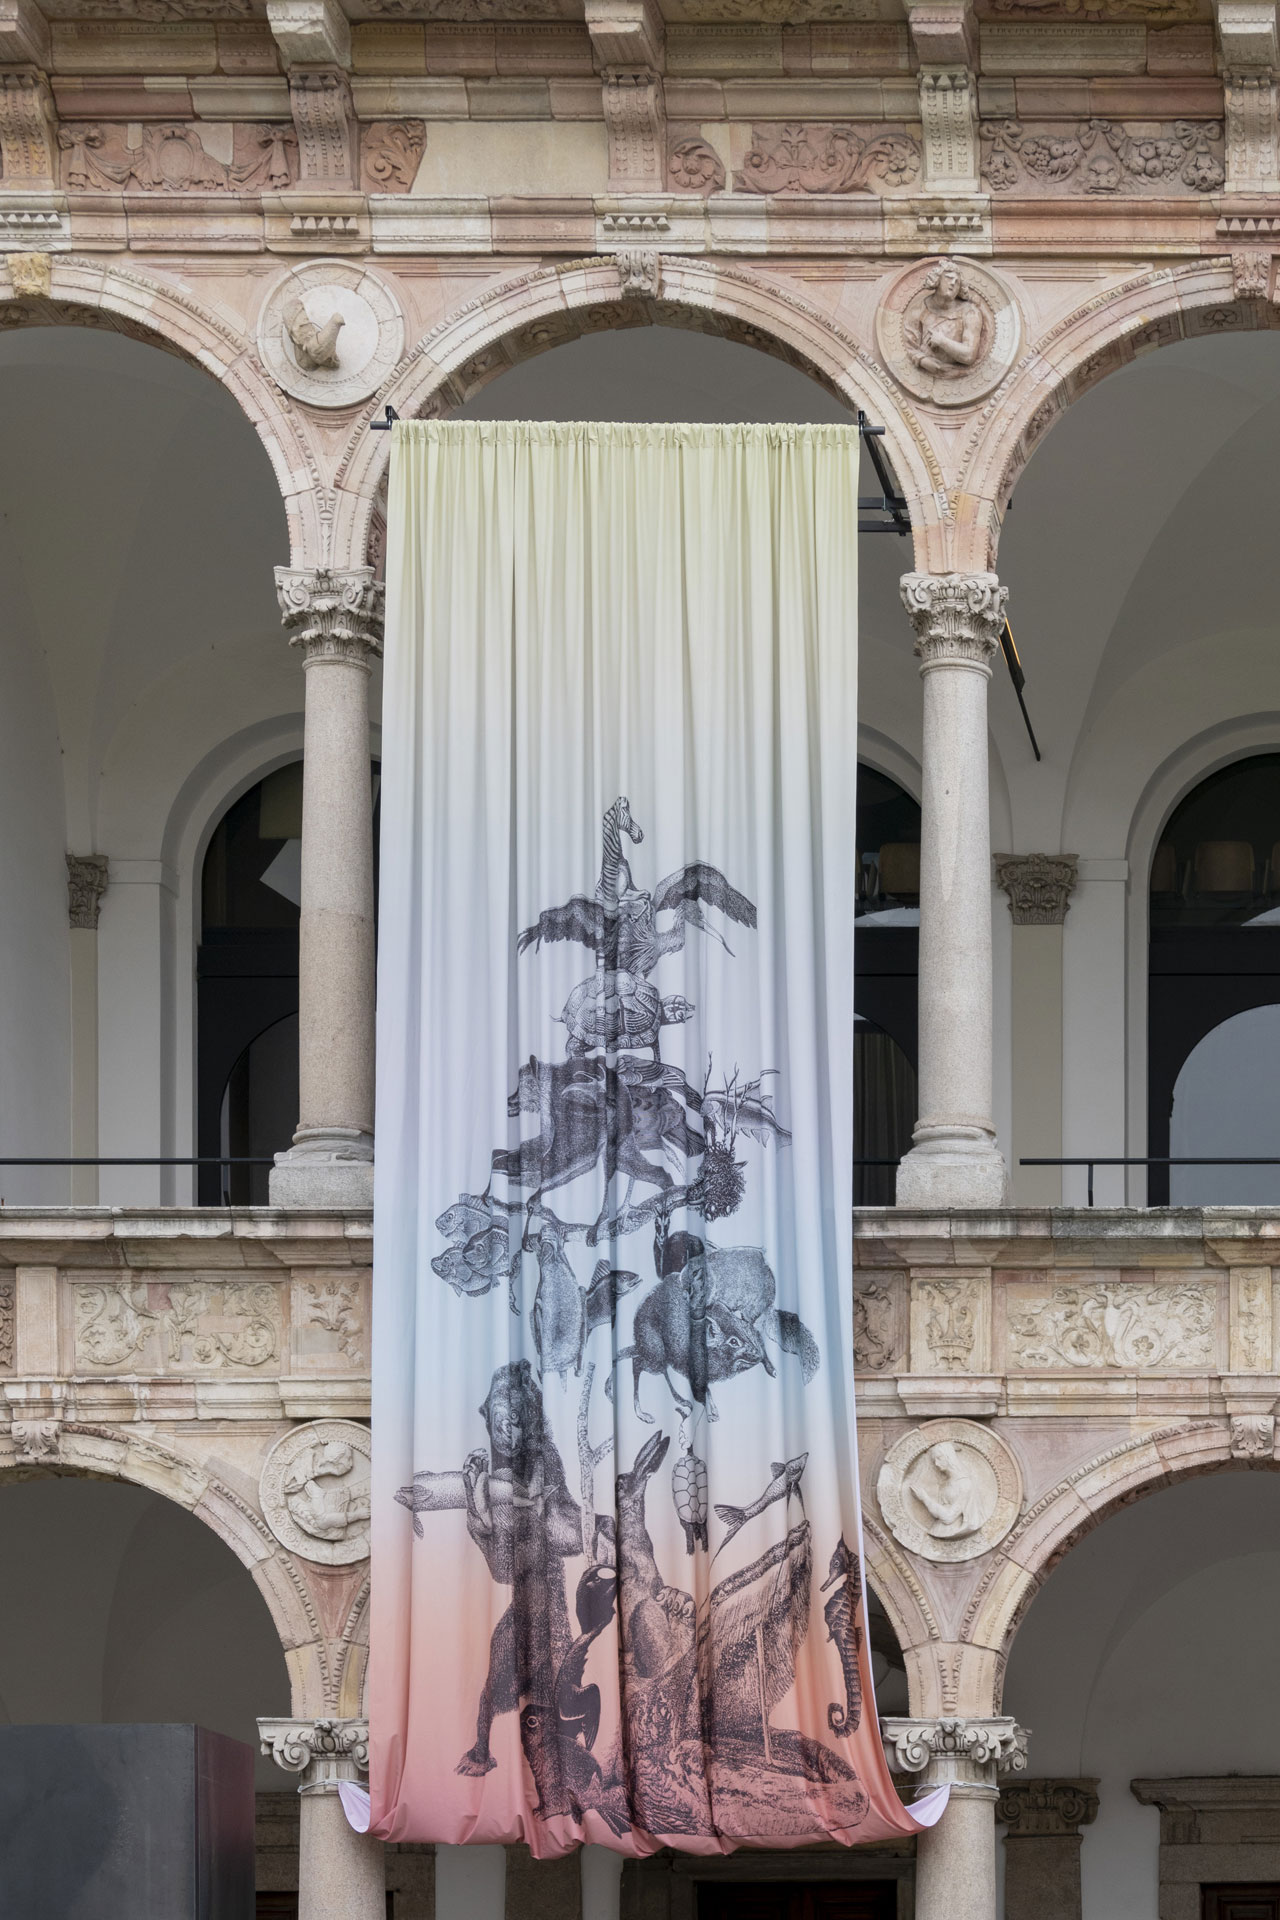 The “Untitled_animals” silk sheet colored with natural dyes by artist Claudia Losi in collaboration with Orticola di Lombardia, was on display at the INTERNI HOUSE IN MOTION exhibition. Photo by Saverio Lombardi Vallauri, Courtesy of INTERNI magazine.